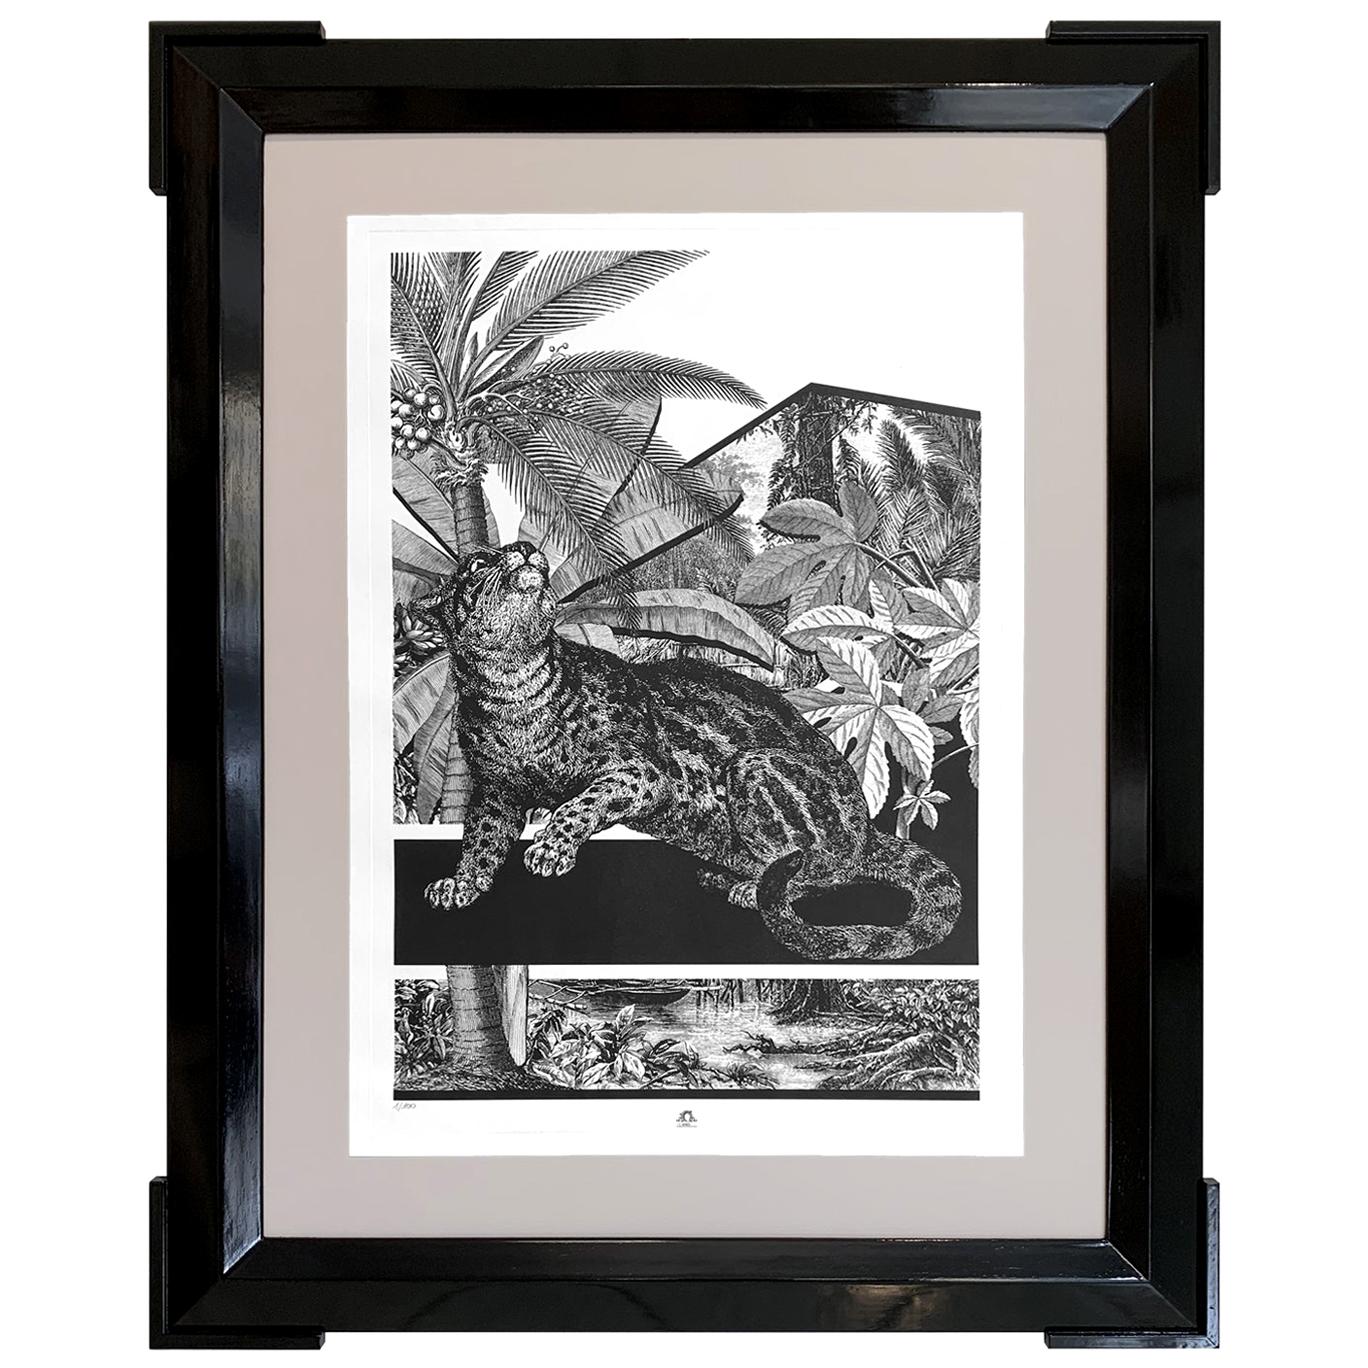  Italian handmade limited edition print  "Black & Wild" Collection For Sale